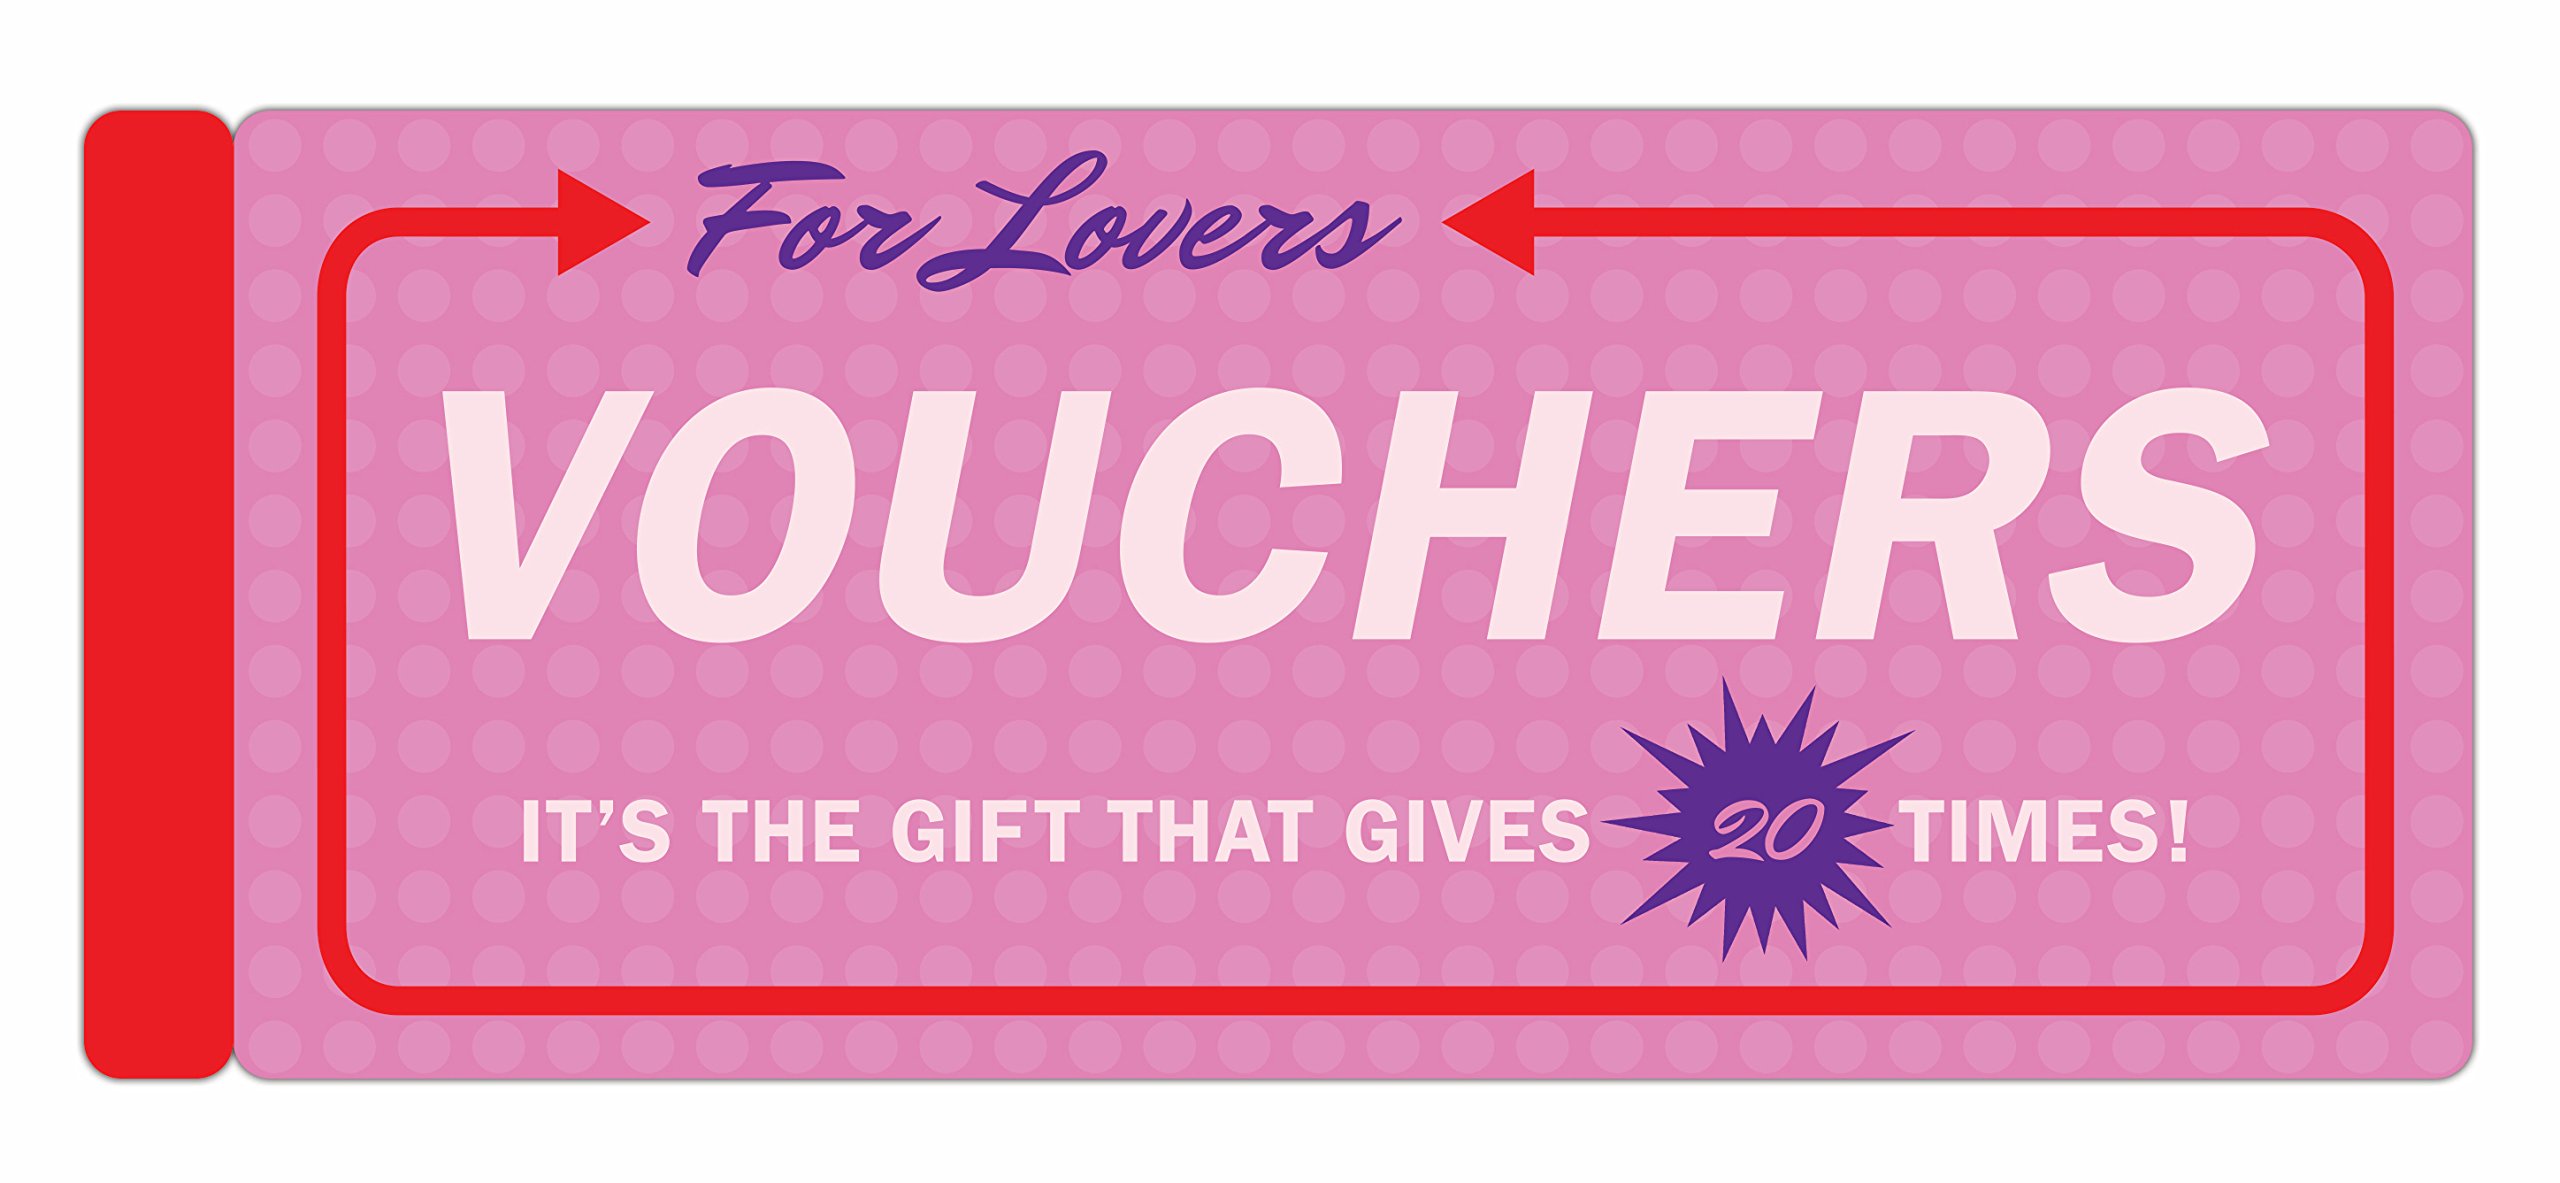 Vouchers For Lovers